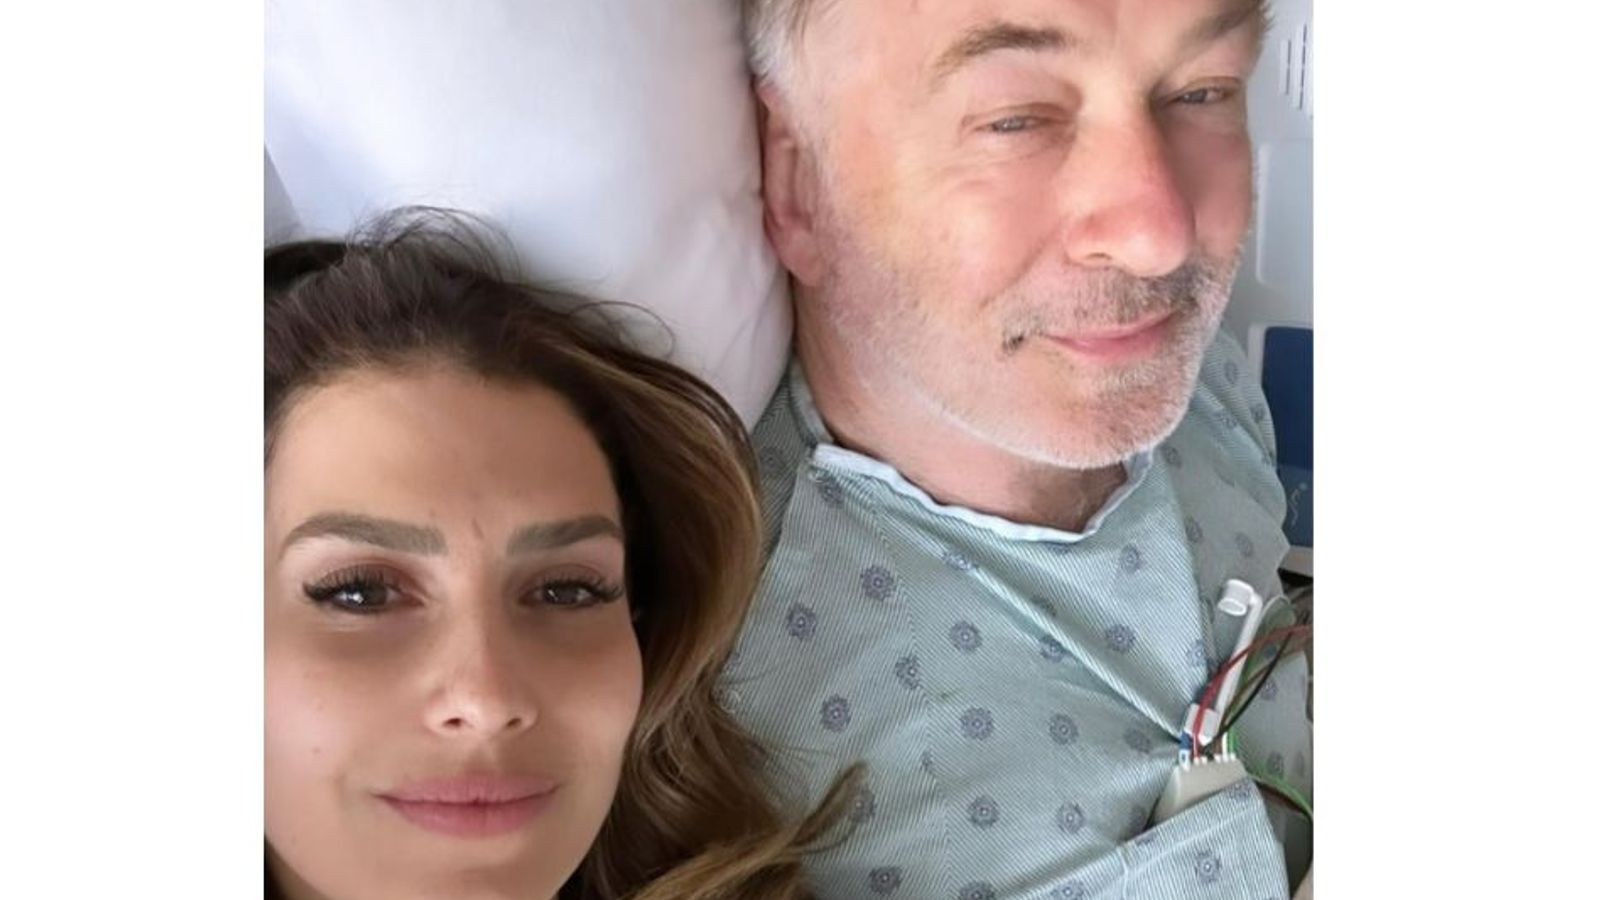 Alec Baldwin has hip replacement surgery: Actor given new 'quality of life' after suffering 'intense chronic pain'